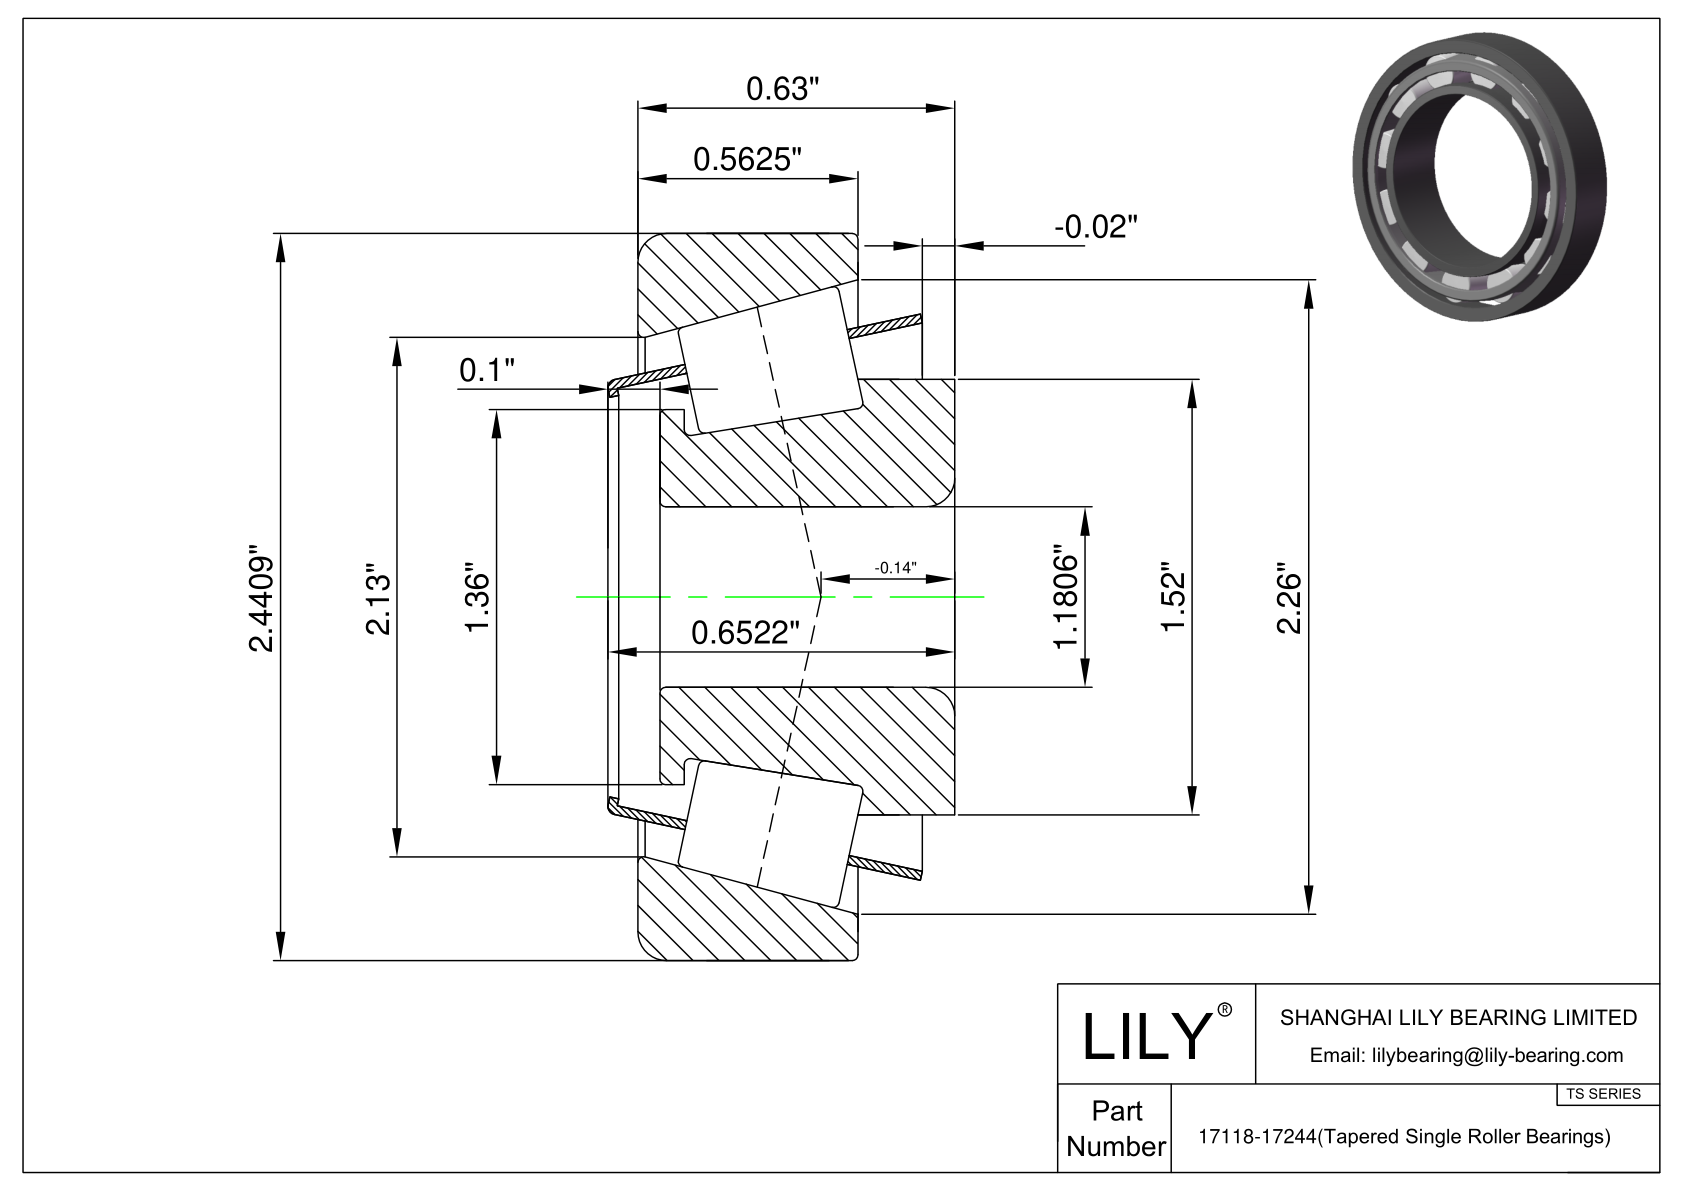 17118-17244 TS (Tapered Single Roller Bearings) (Imperial) cad drawing